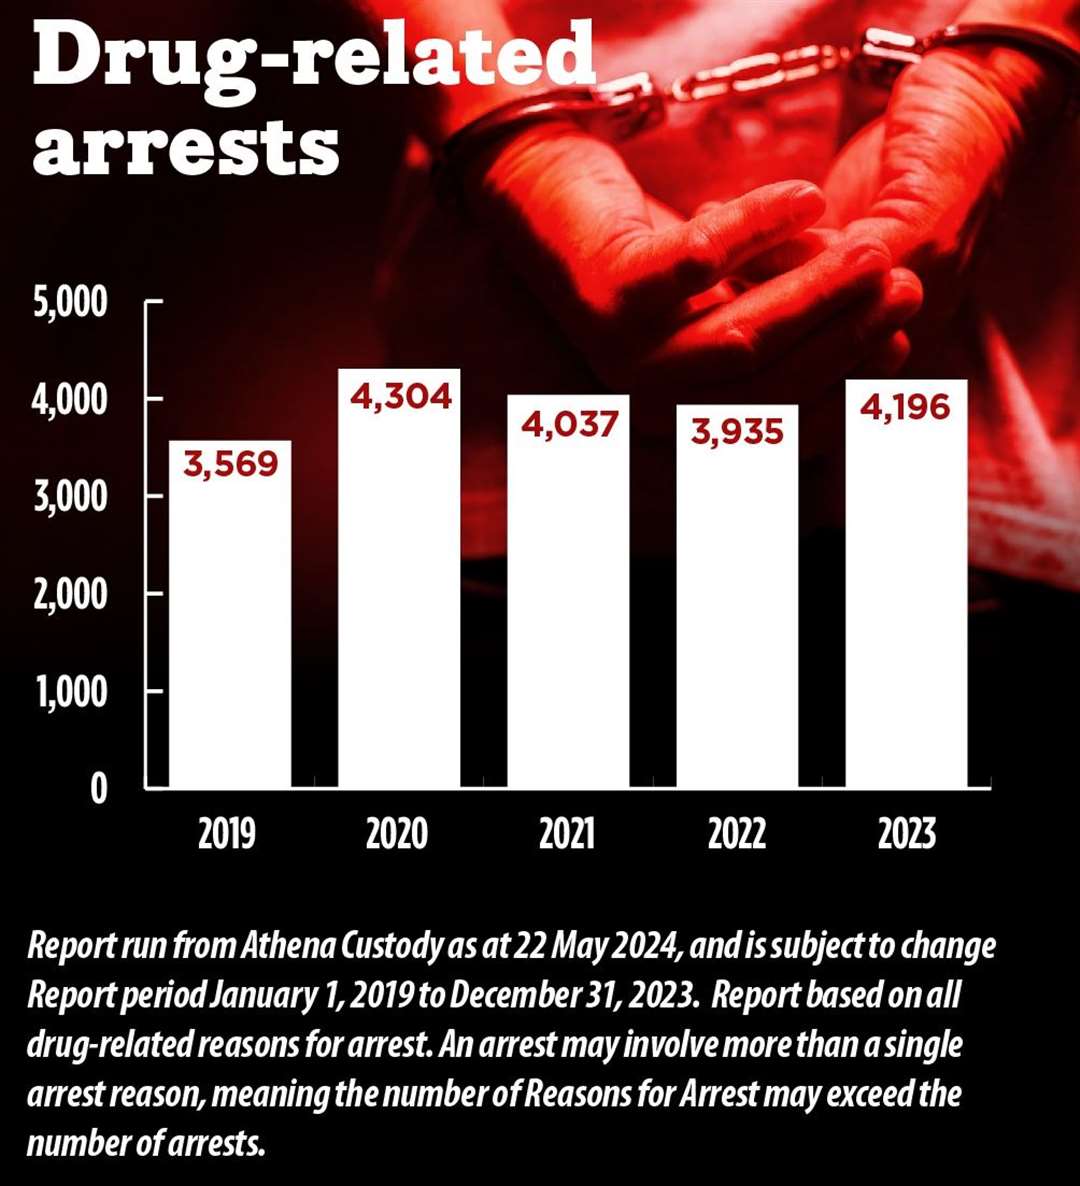 The number of drug-related arrests in Kent has risen significantly since 2019